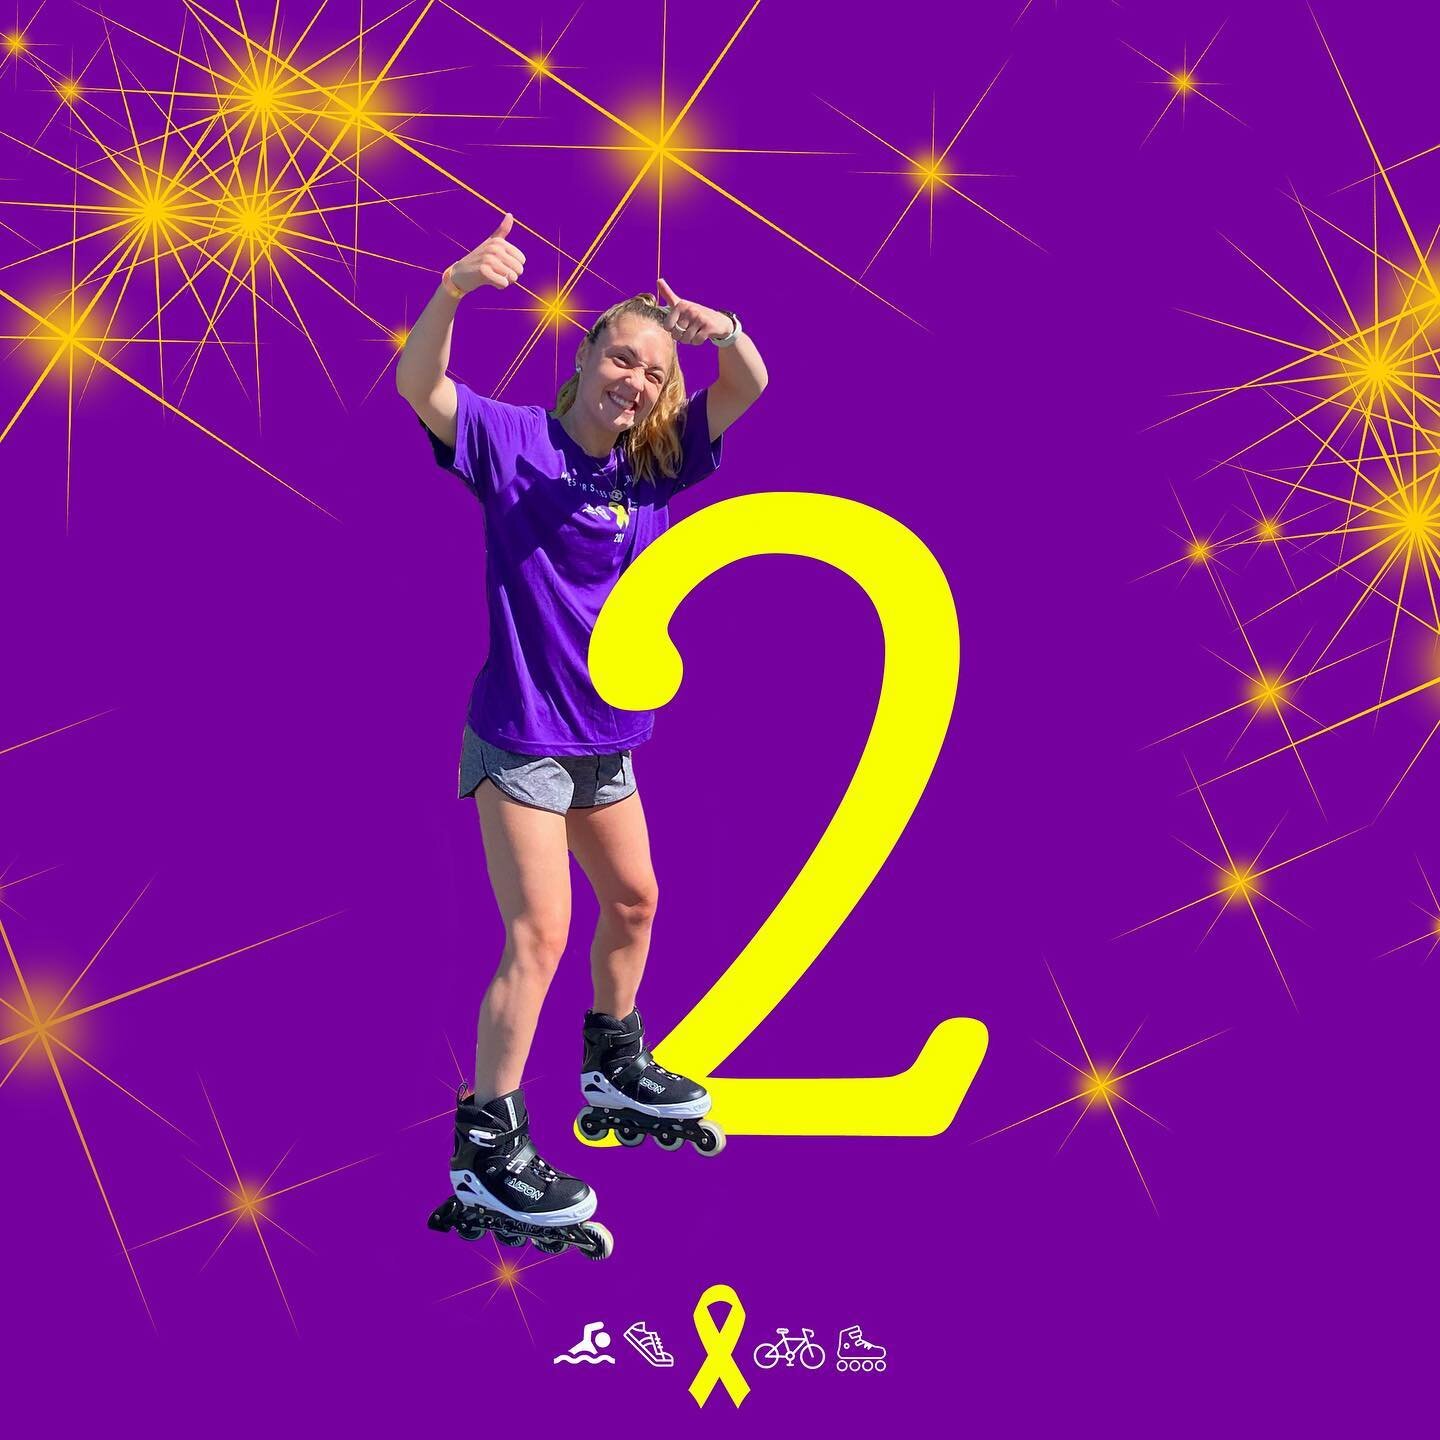 2 DAYS LEFT TO REGISTER FOR THE MILES FOR SMILES VIRTUAL CHALLENGE 🏊🏼&zwj;♂️🚴🏼&zwj;♂️🏃🏻&zwj;♀️🏌️&zwj;♂️

Link to register and donate in our bio💜💛#KeepSmiling